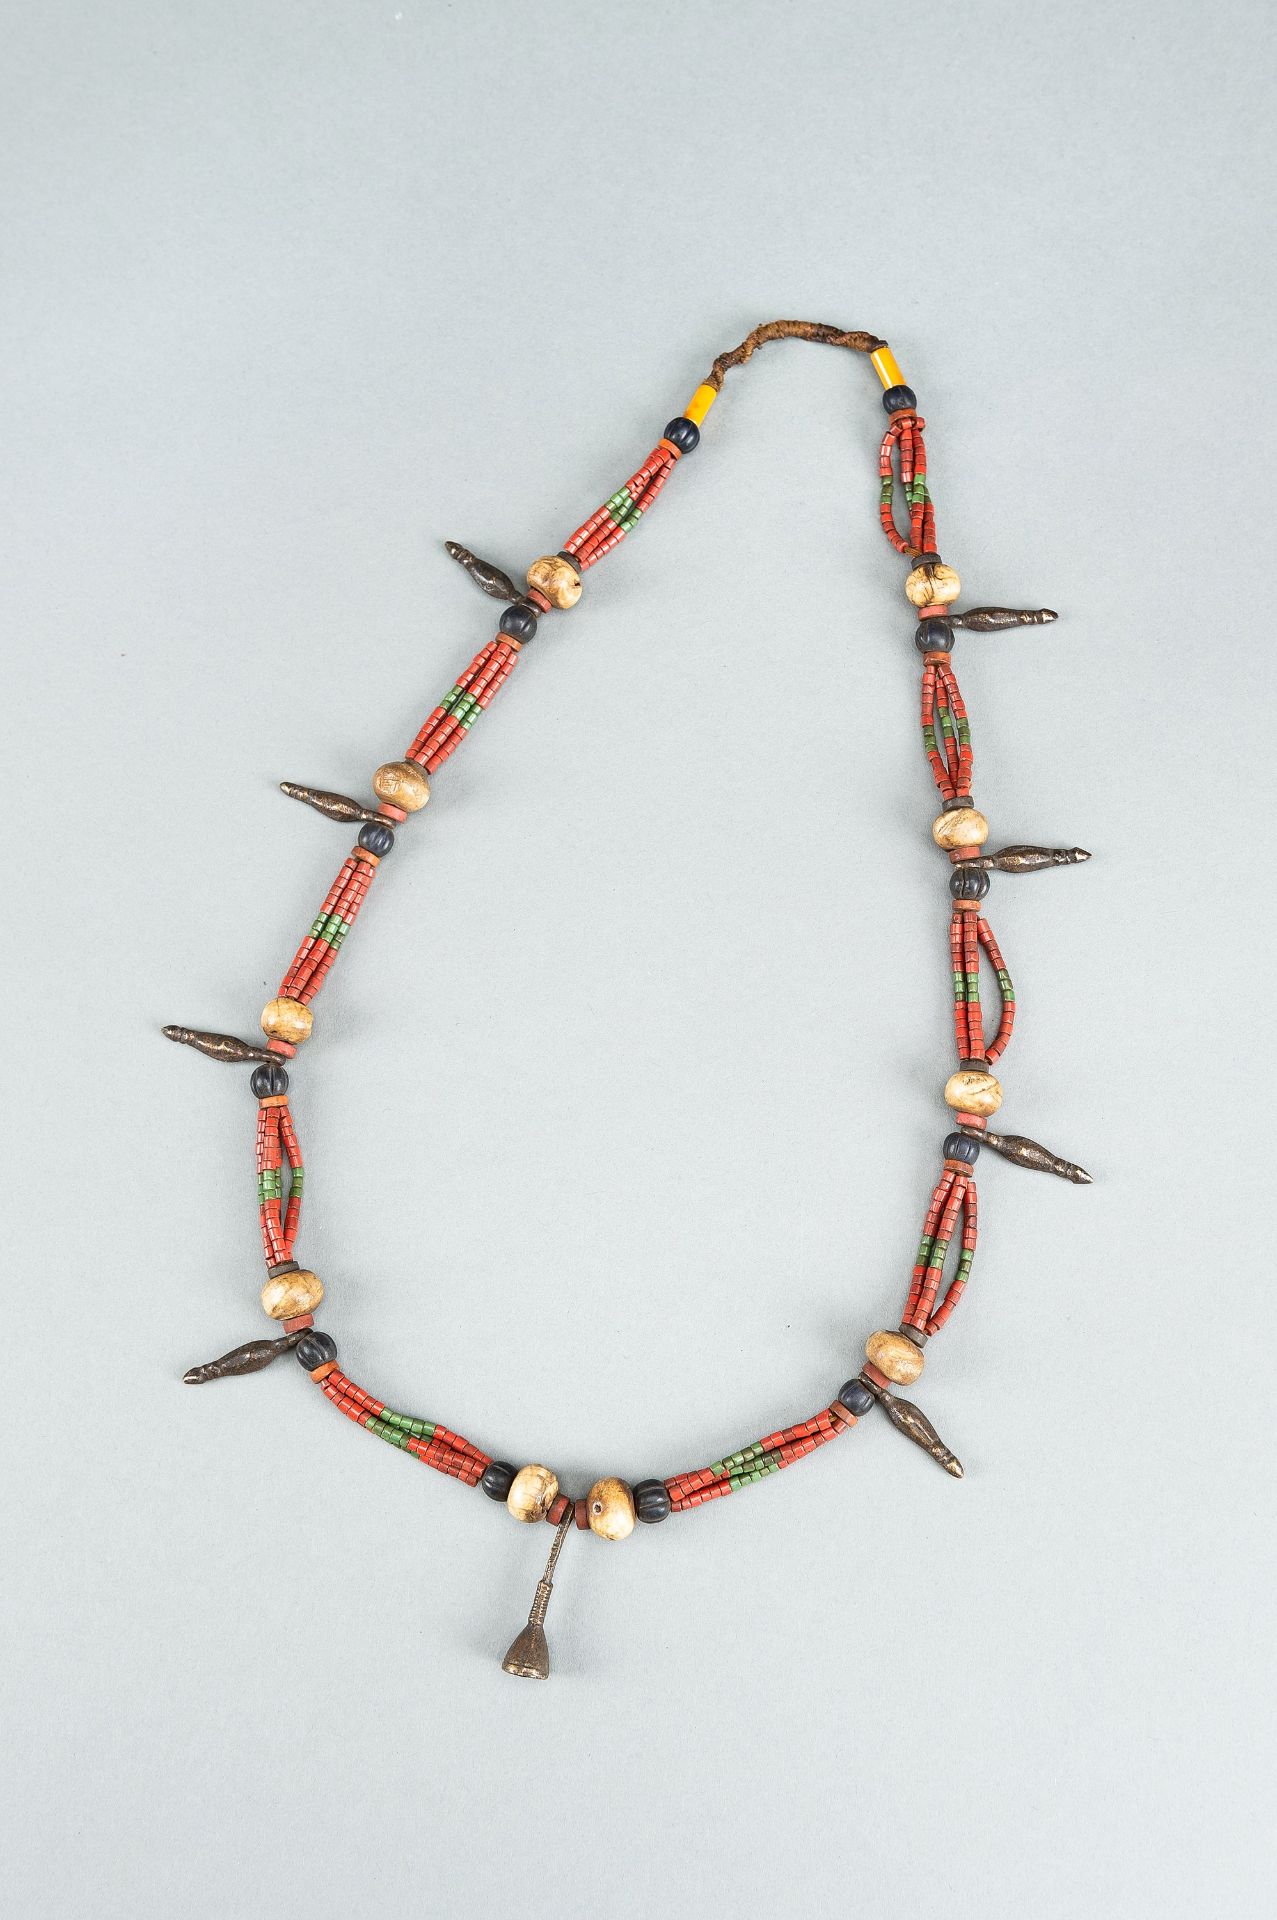 A NAGALAND MULTI-COLORED GLASS, BRASS AND SHELL NECKLACE, c. 1900s - Image 2 of 9